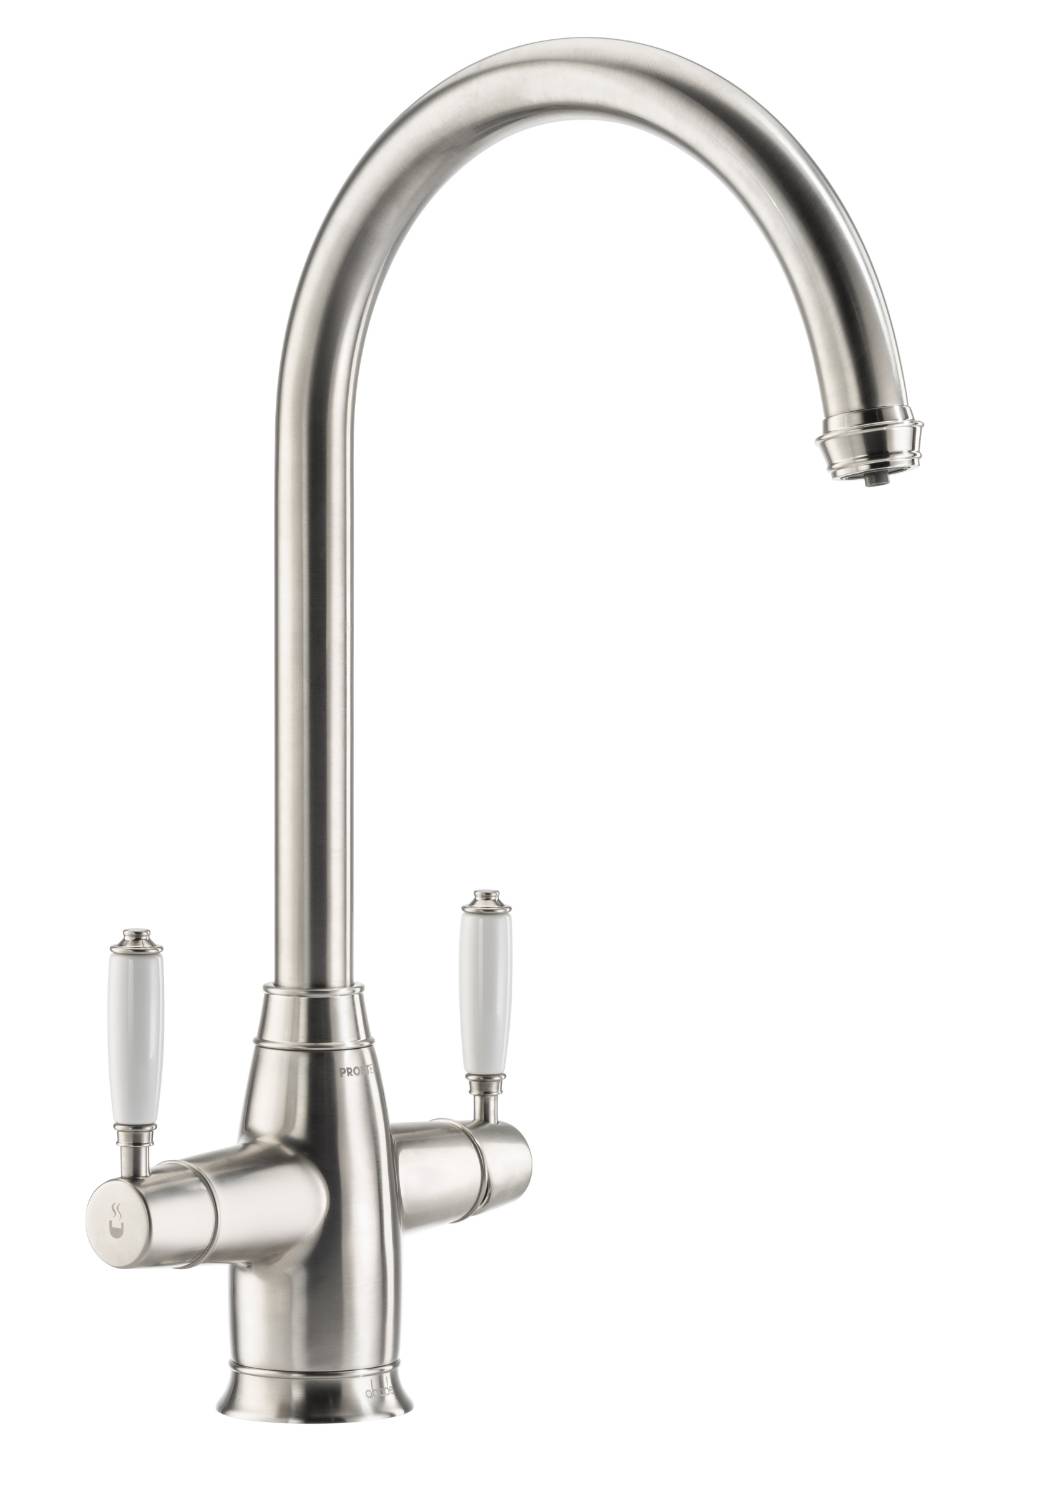 PRONTEAU™ ProTrad - 3 in 1 Steaming Hot Water Tap - Boiling Hot Water Tap